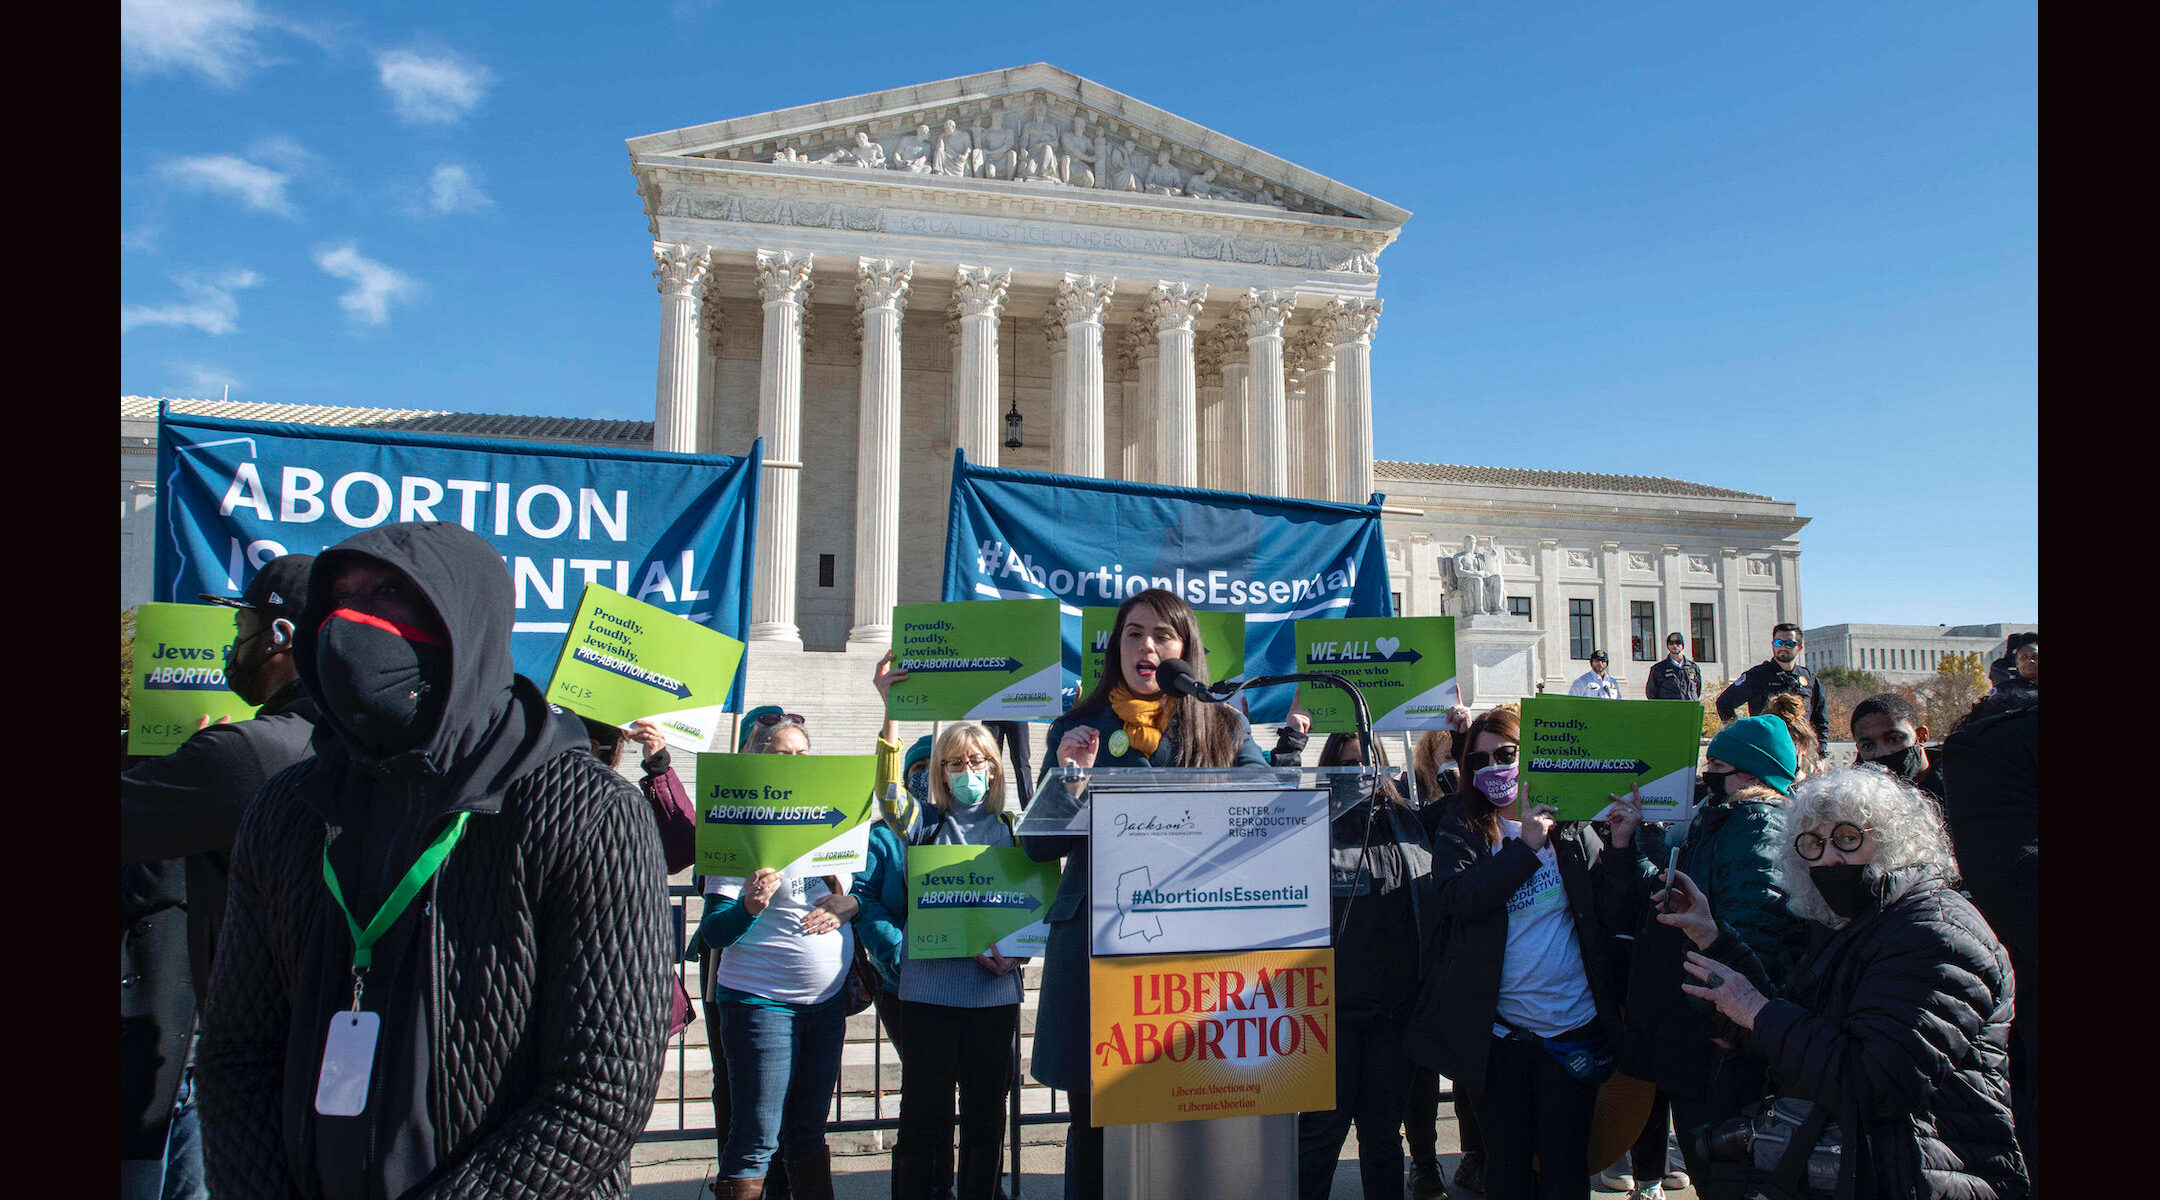 JTA: Rally planned by Jewish advocates for abortion rights take on new significance